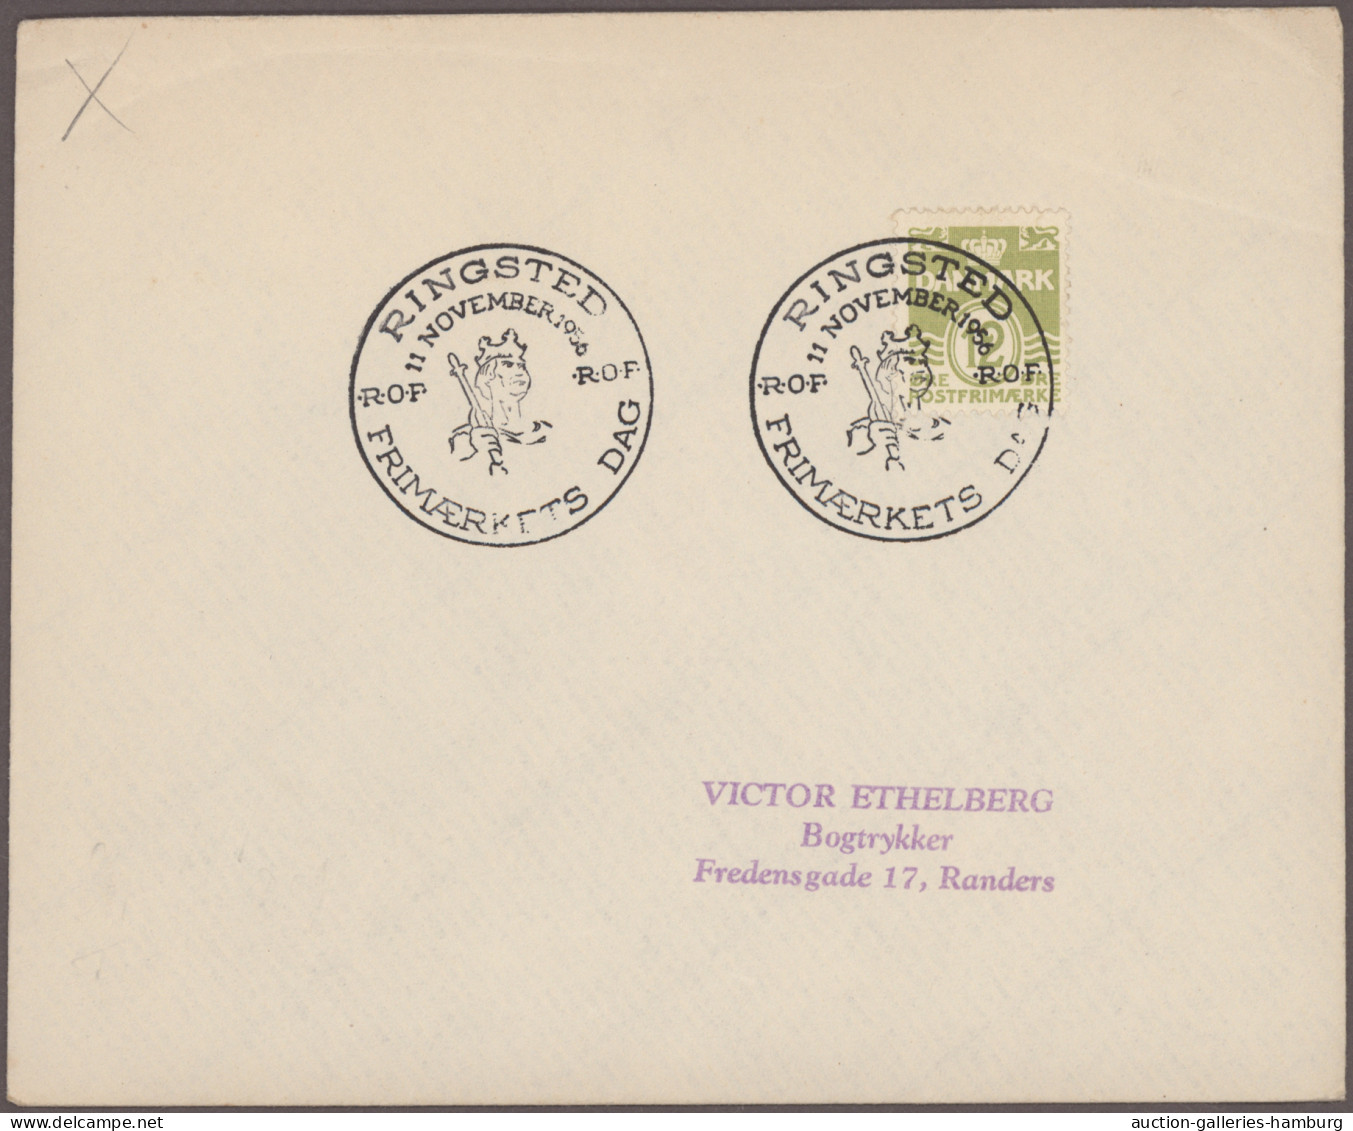 Denmark - Post Marks: 1947/1993, SPECIAL EVENT POSTMARKS, Holding Of Apprx. 560 - Franking Machines (EMA)